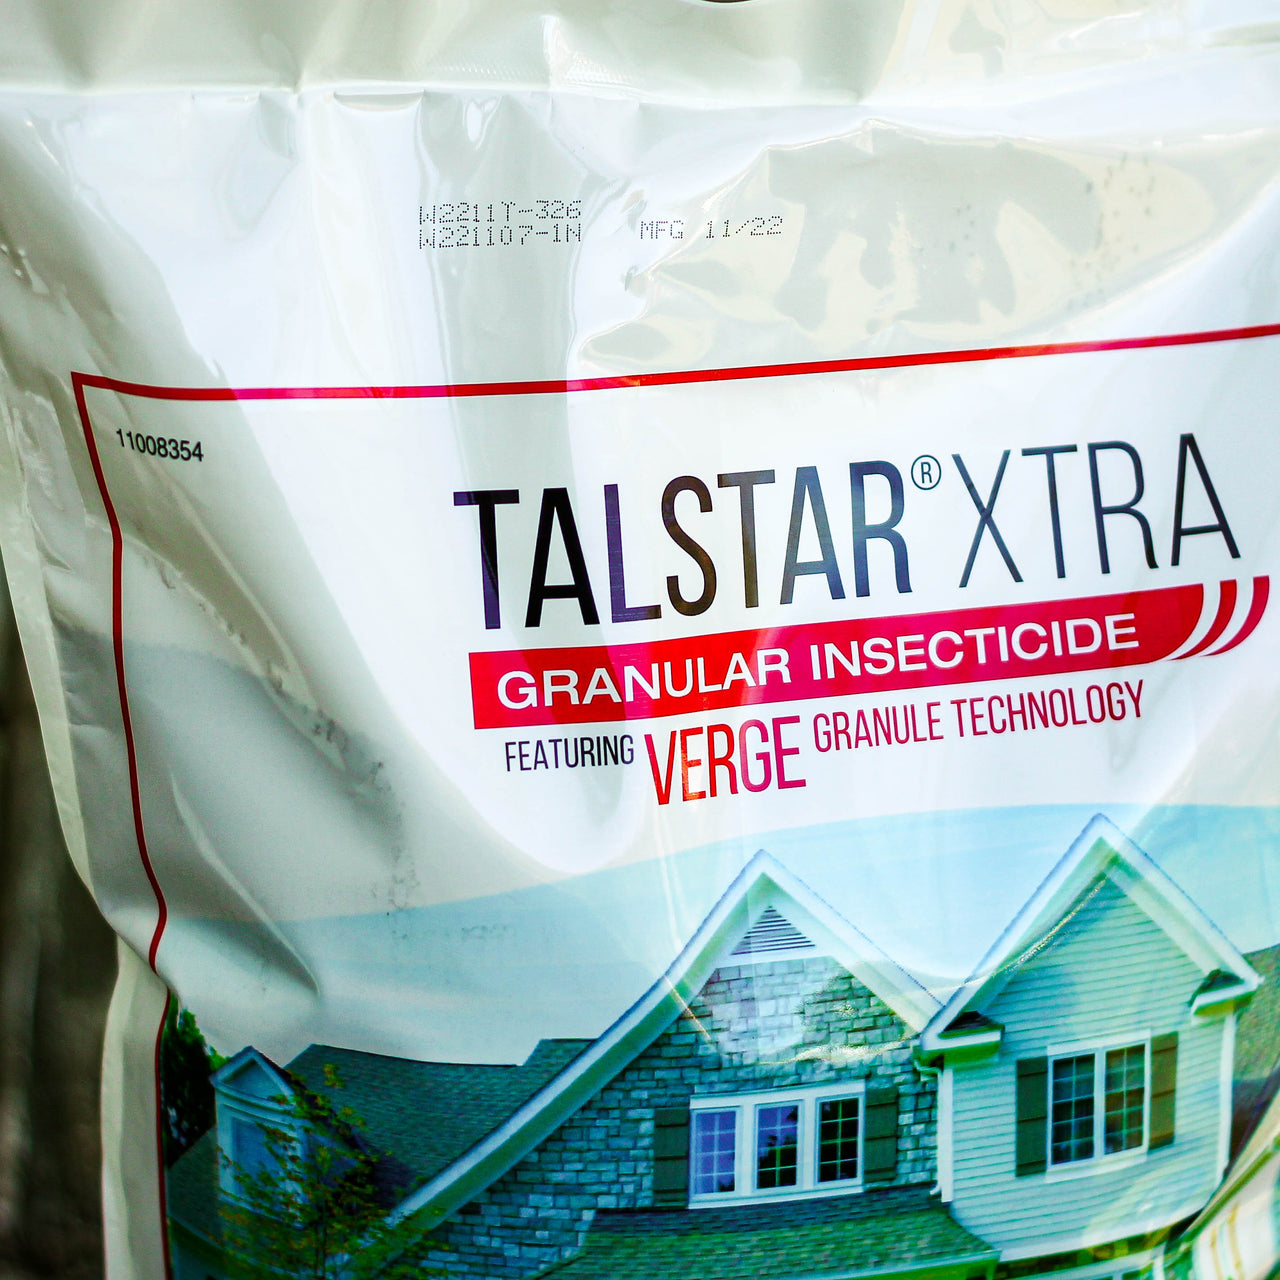 Controlling Fire Ants: Talstar XTRA Granular Insecticide